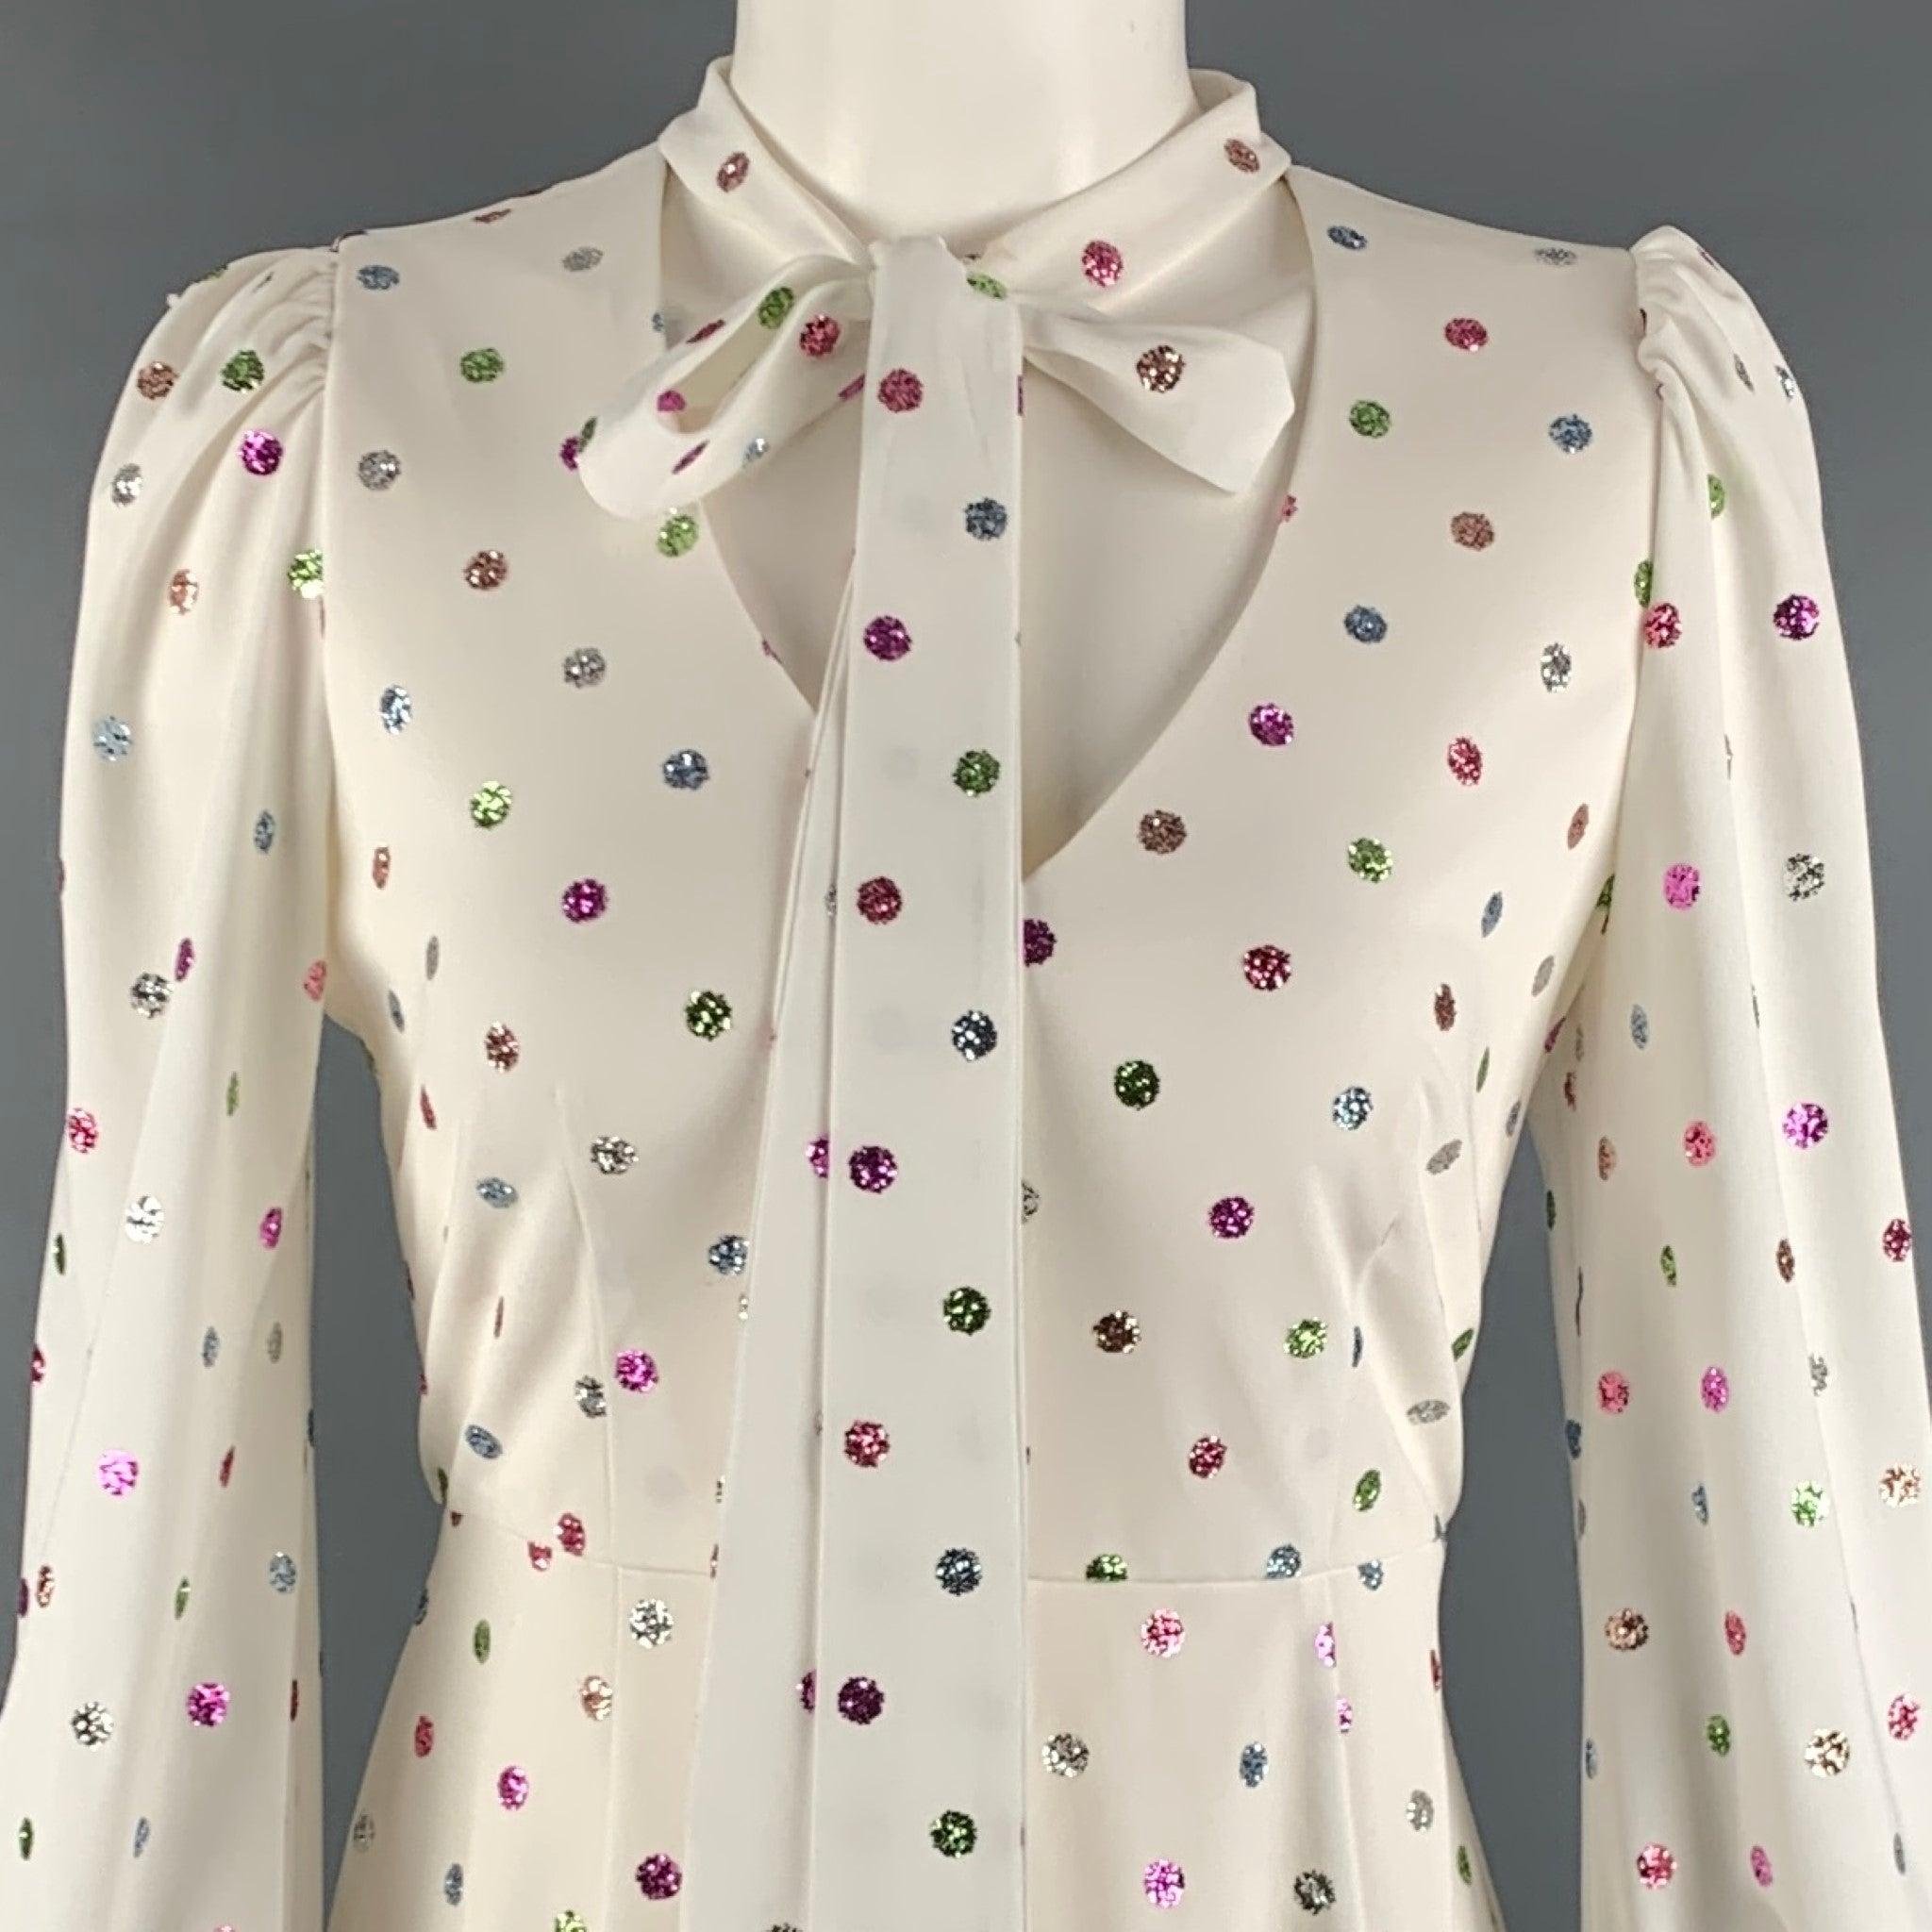 MARC JACOBS dress in a white polyester fabric featuring all over multi color glitter dots, pussycat bow, blouson sleeves, and V-neck.Very Good Pre-Owned Condition. Minor mark on bow, and pilling on right side. 

Marked:  2 

Measurements: 
